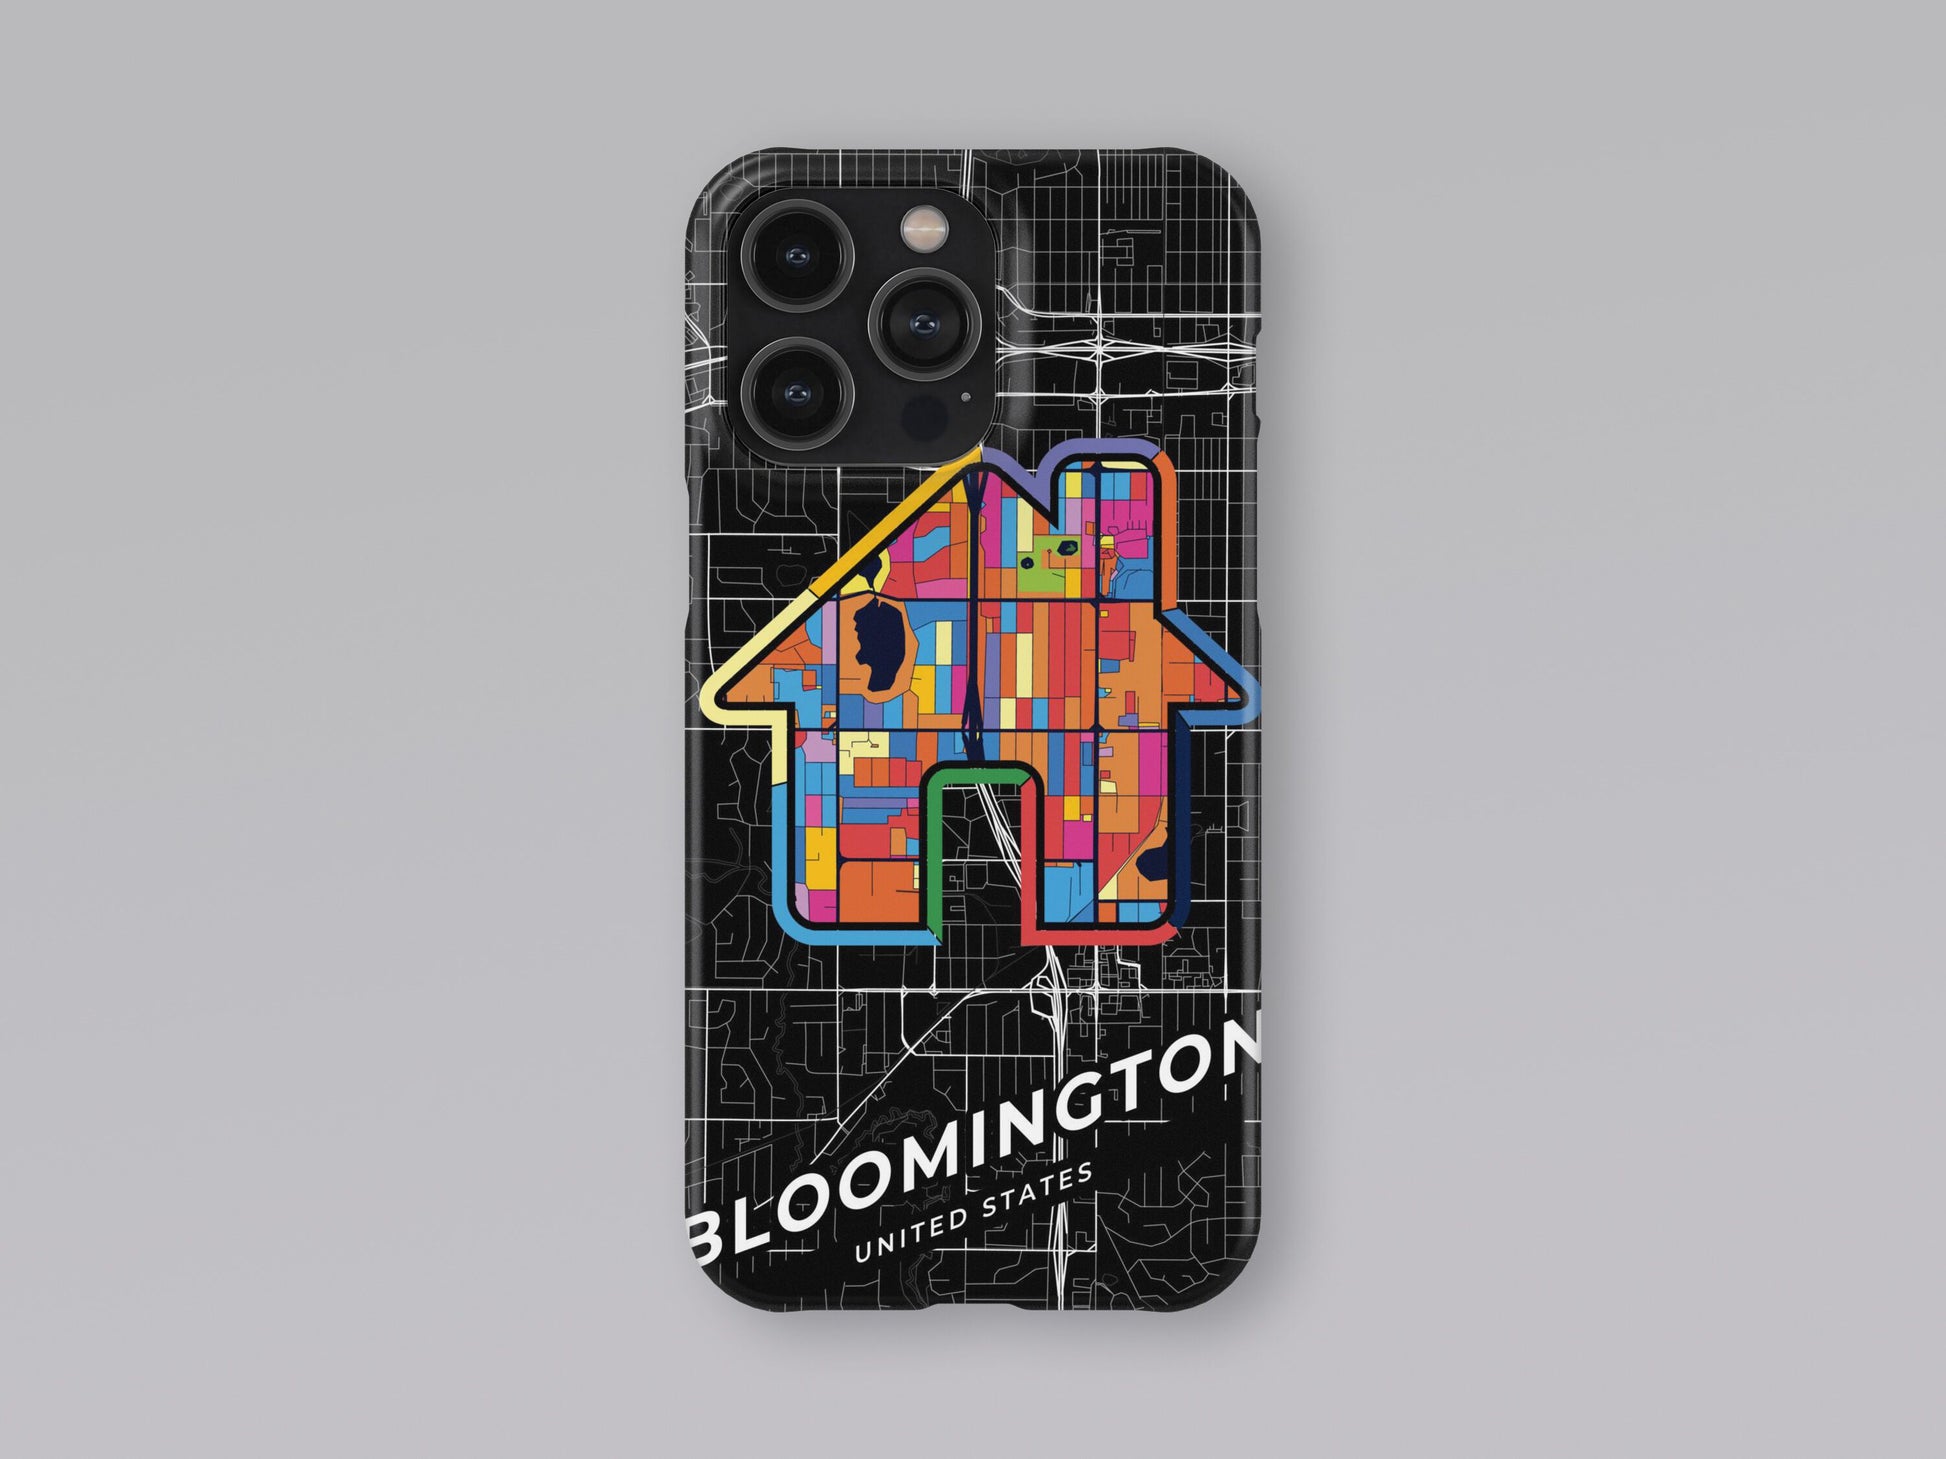 Bloomington Minnesota slim phone case with colorful icon. Birthday, wedding or housewarming gift. Couple match cases. 3